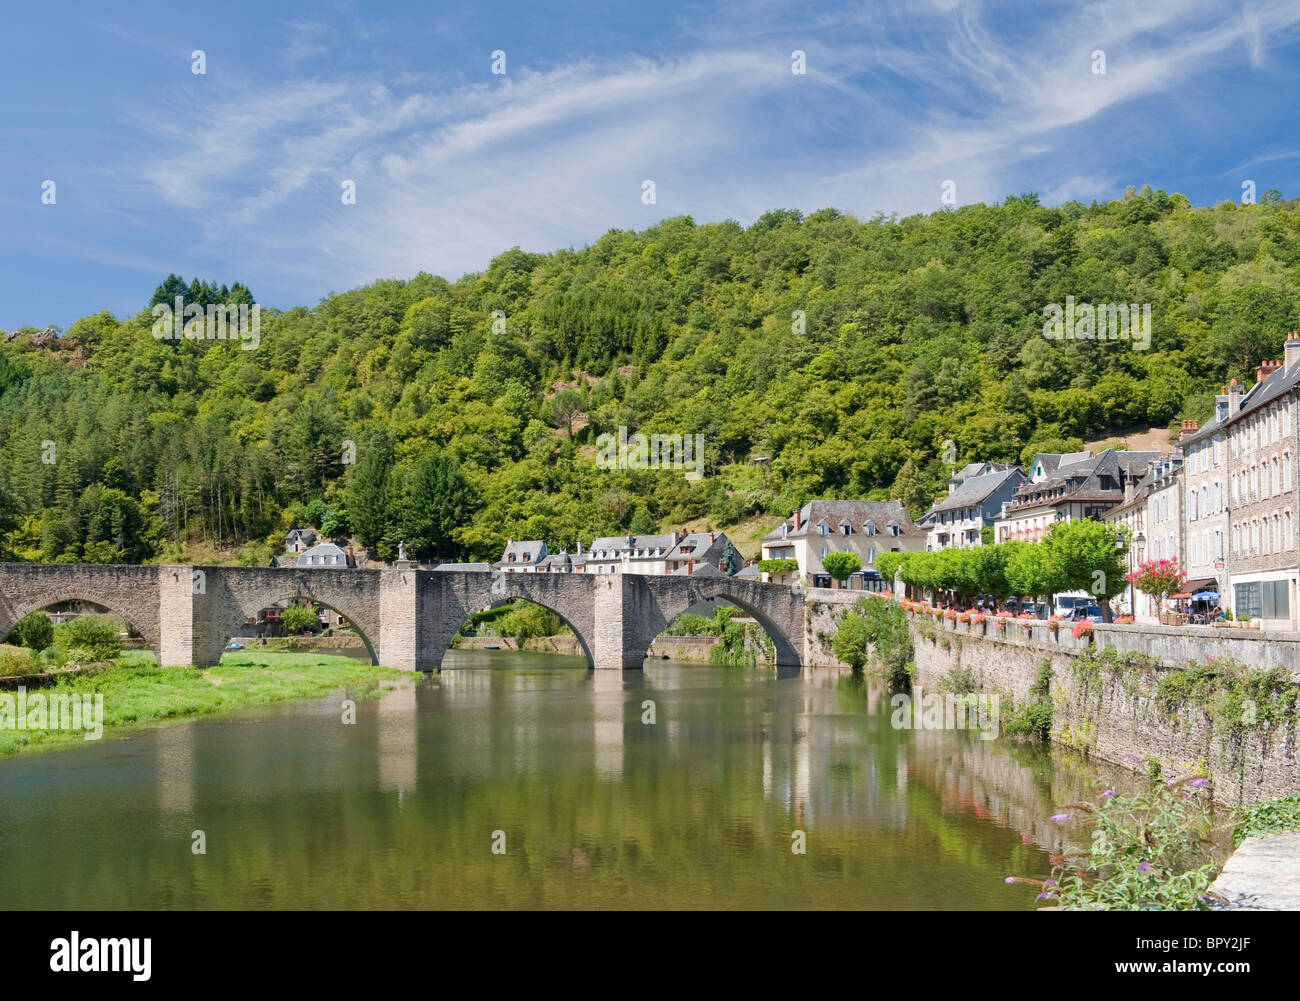 The Bridge at Estaing Village in Central France Stock Photo